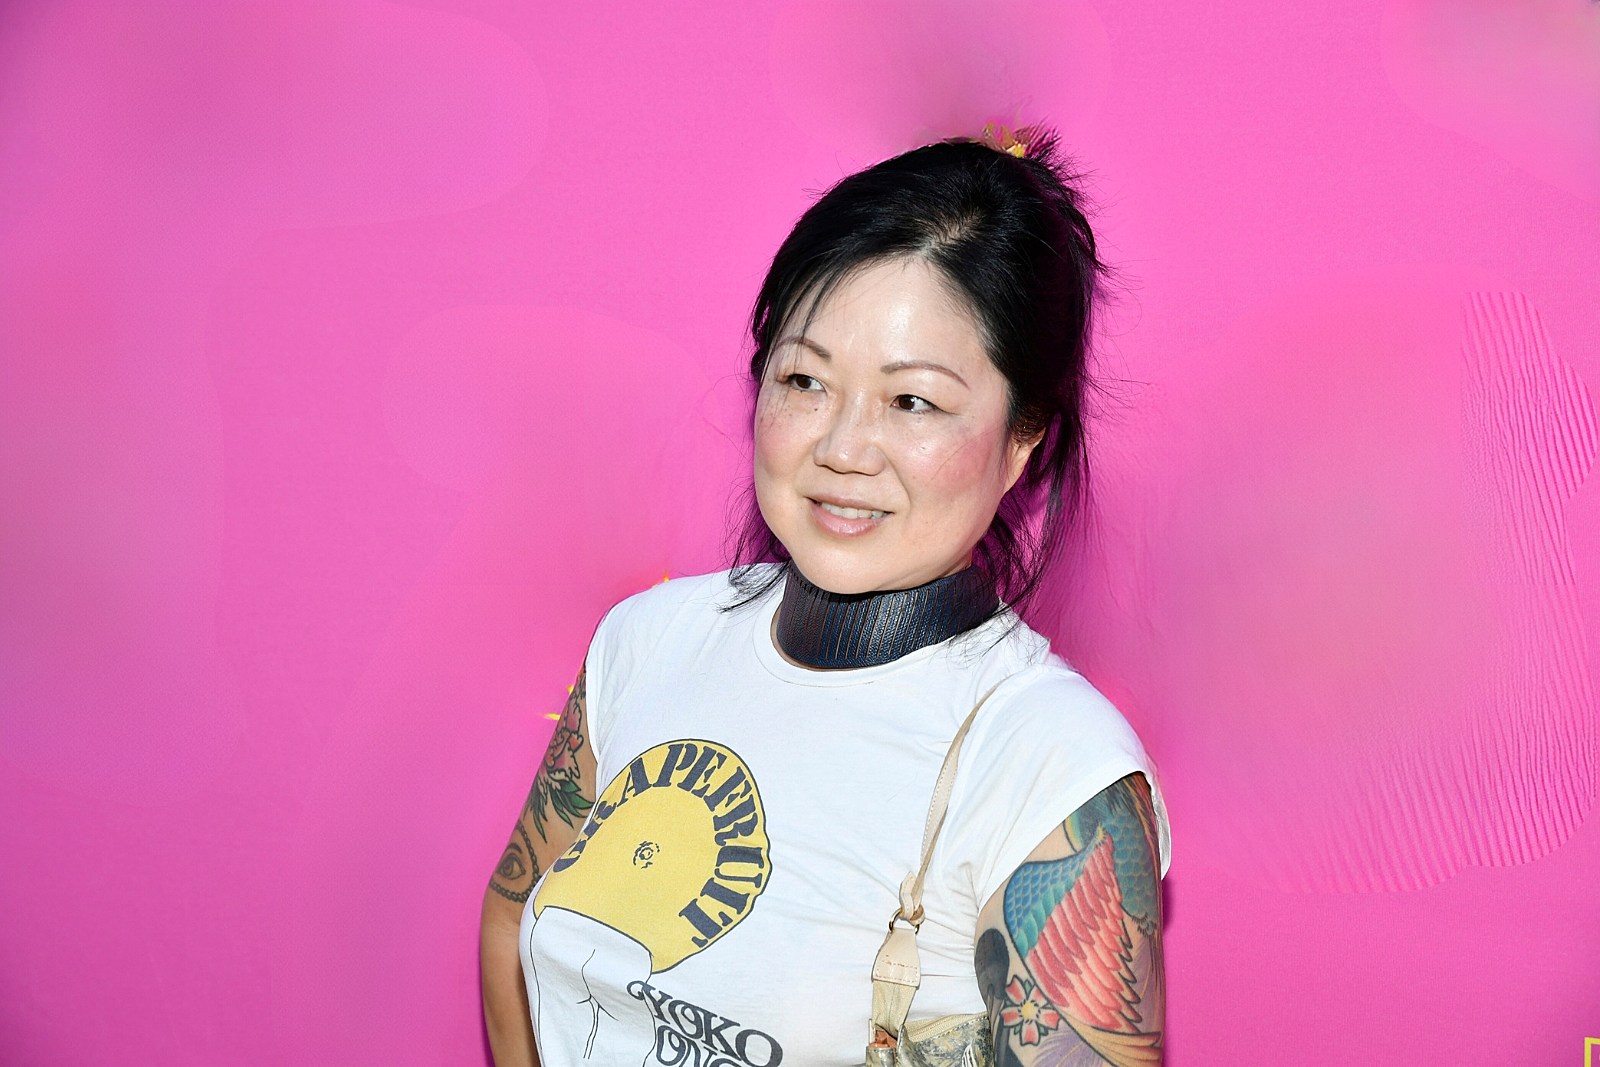 Margaret Cho Tour Set to Perform a Show in Yakima in May